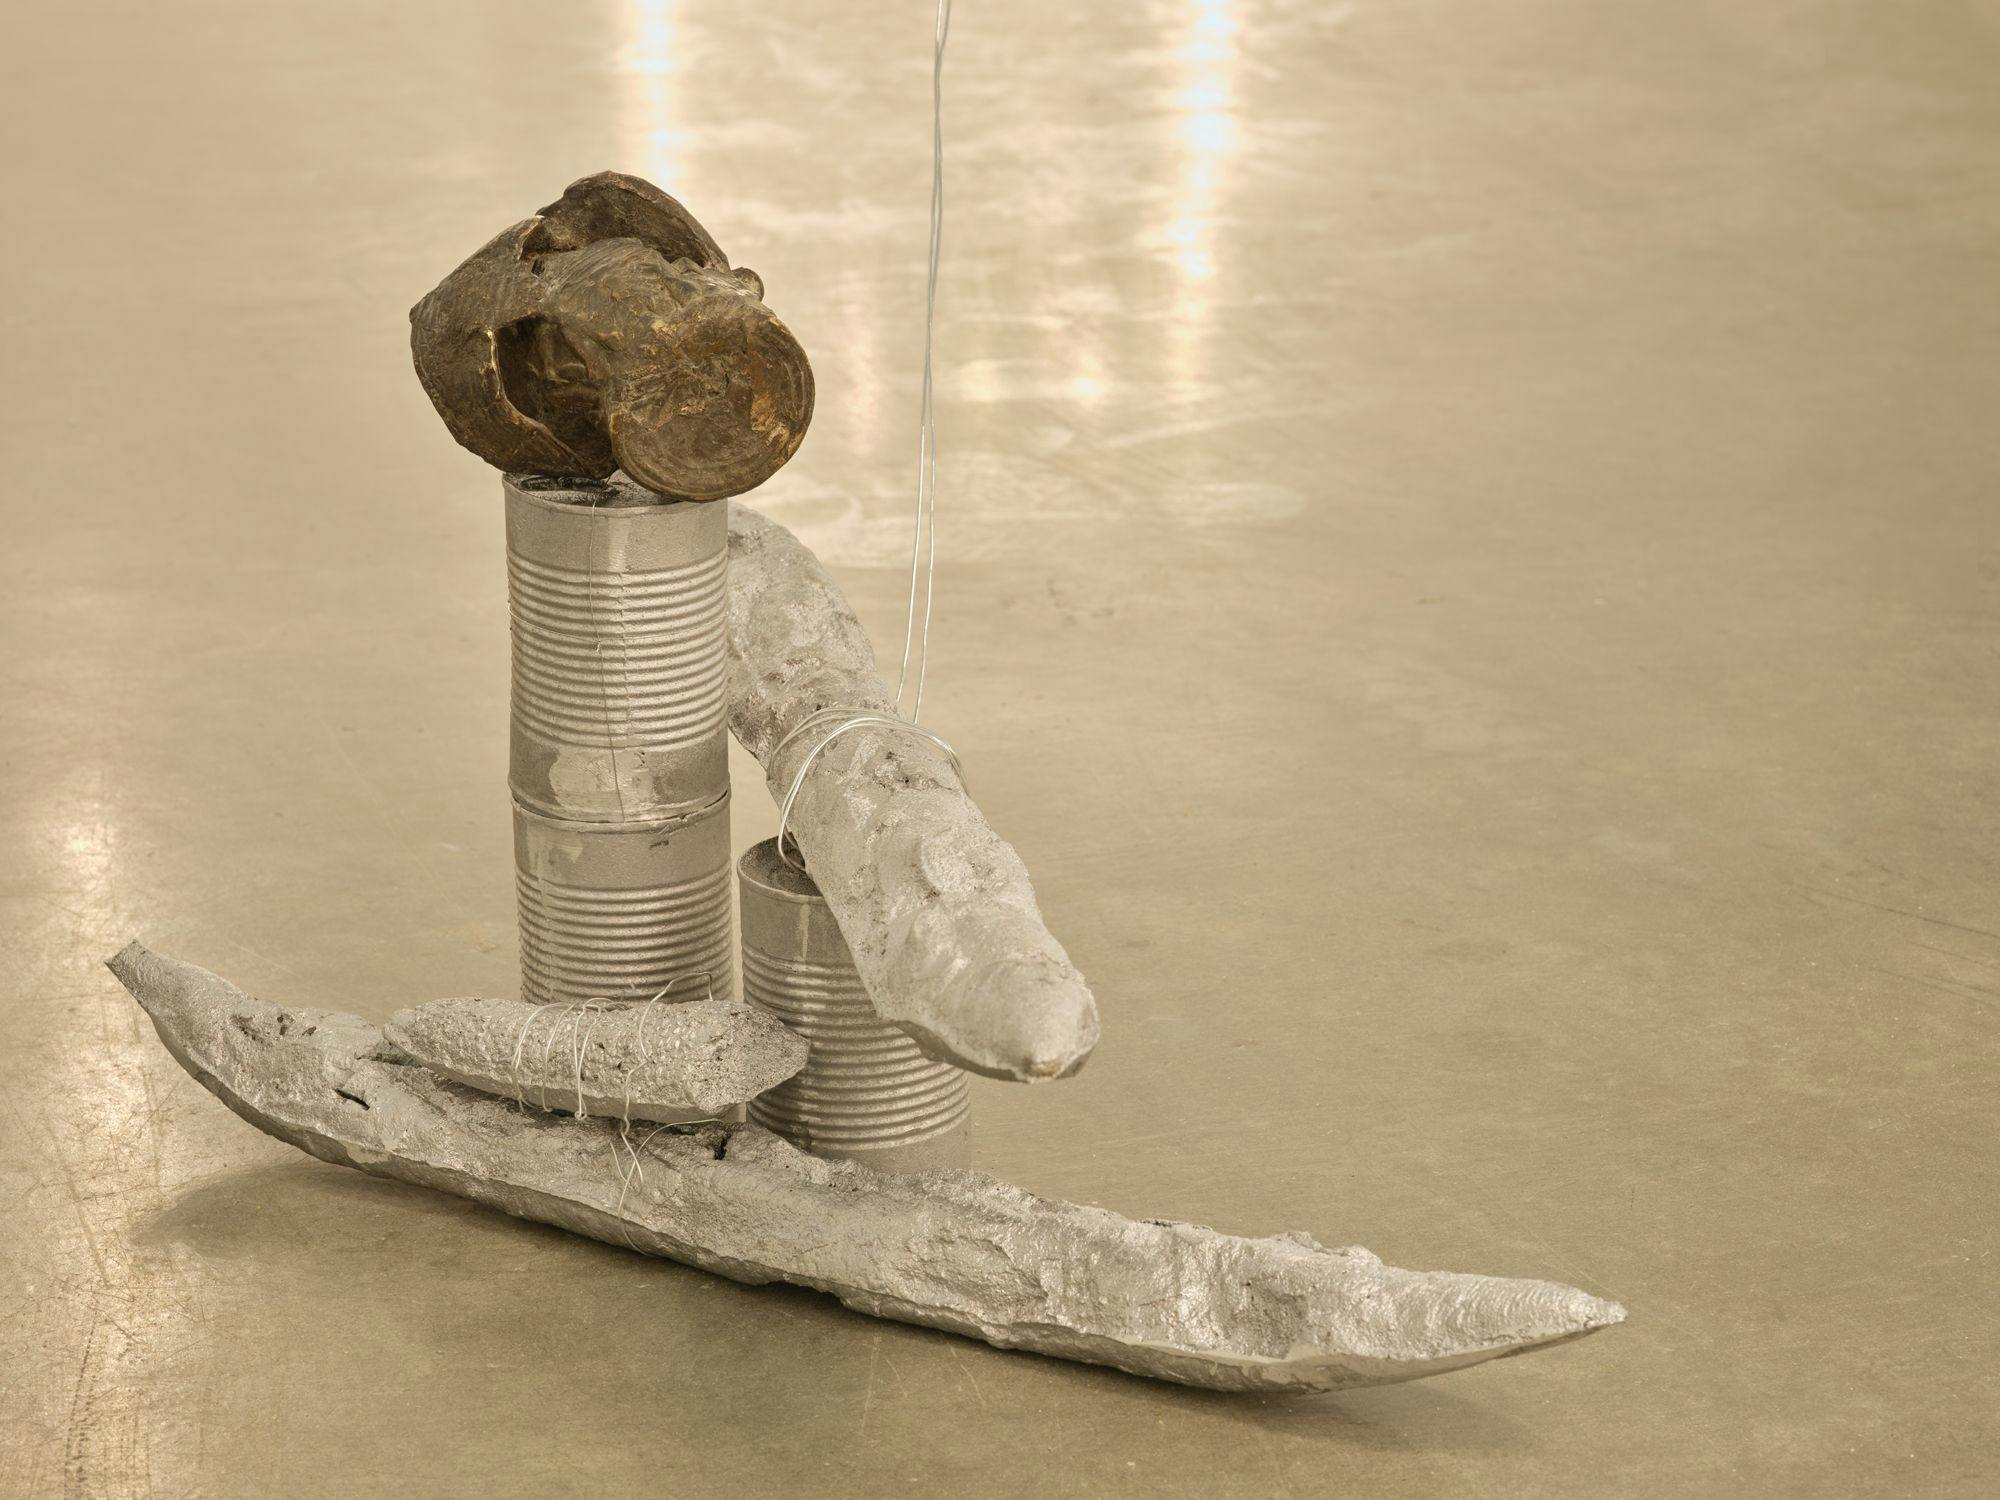 A detail of a sculpture comprised of silver-painted baguettes, wire, aluminum cans and a bronze can whose form appears to be disintegrating.